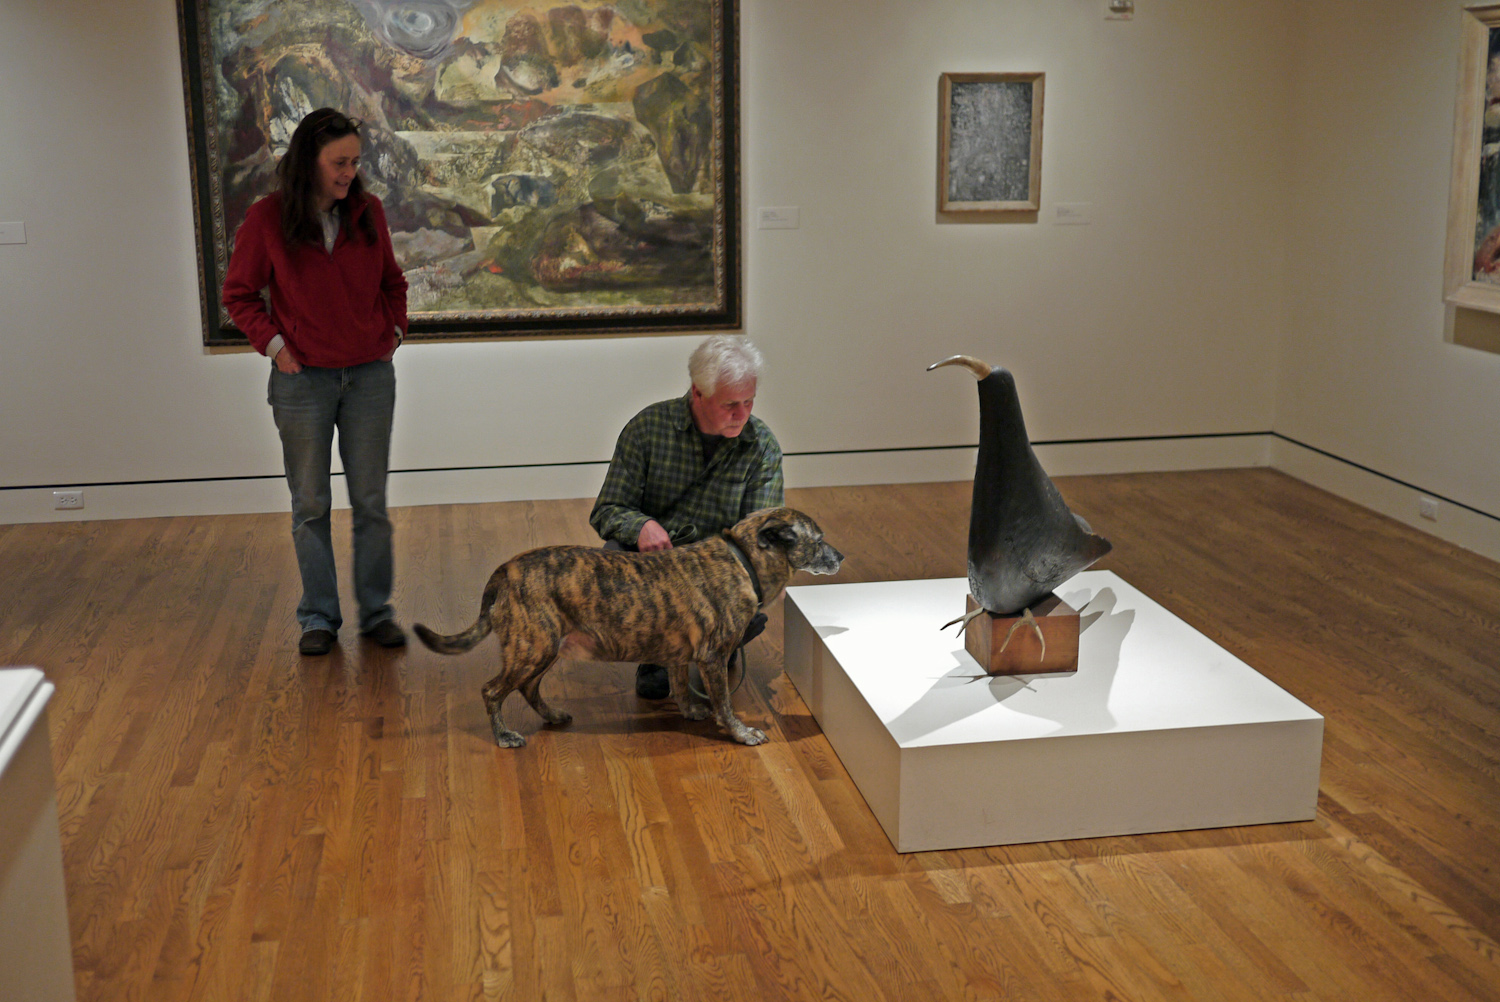  Owners Steve and Tannis with dog Buddy at “Thunderbird” by Mark Sponenburgh, 1945/1950. Image taken on March 13, 2013.   